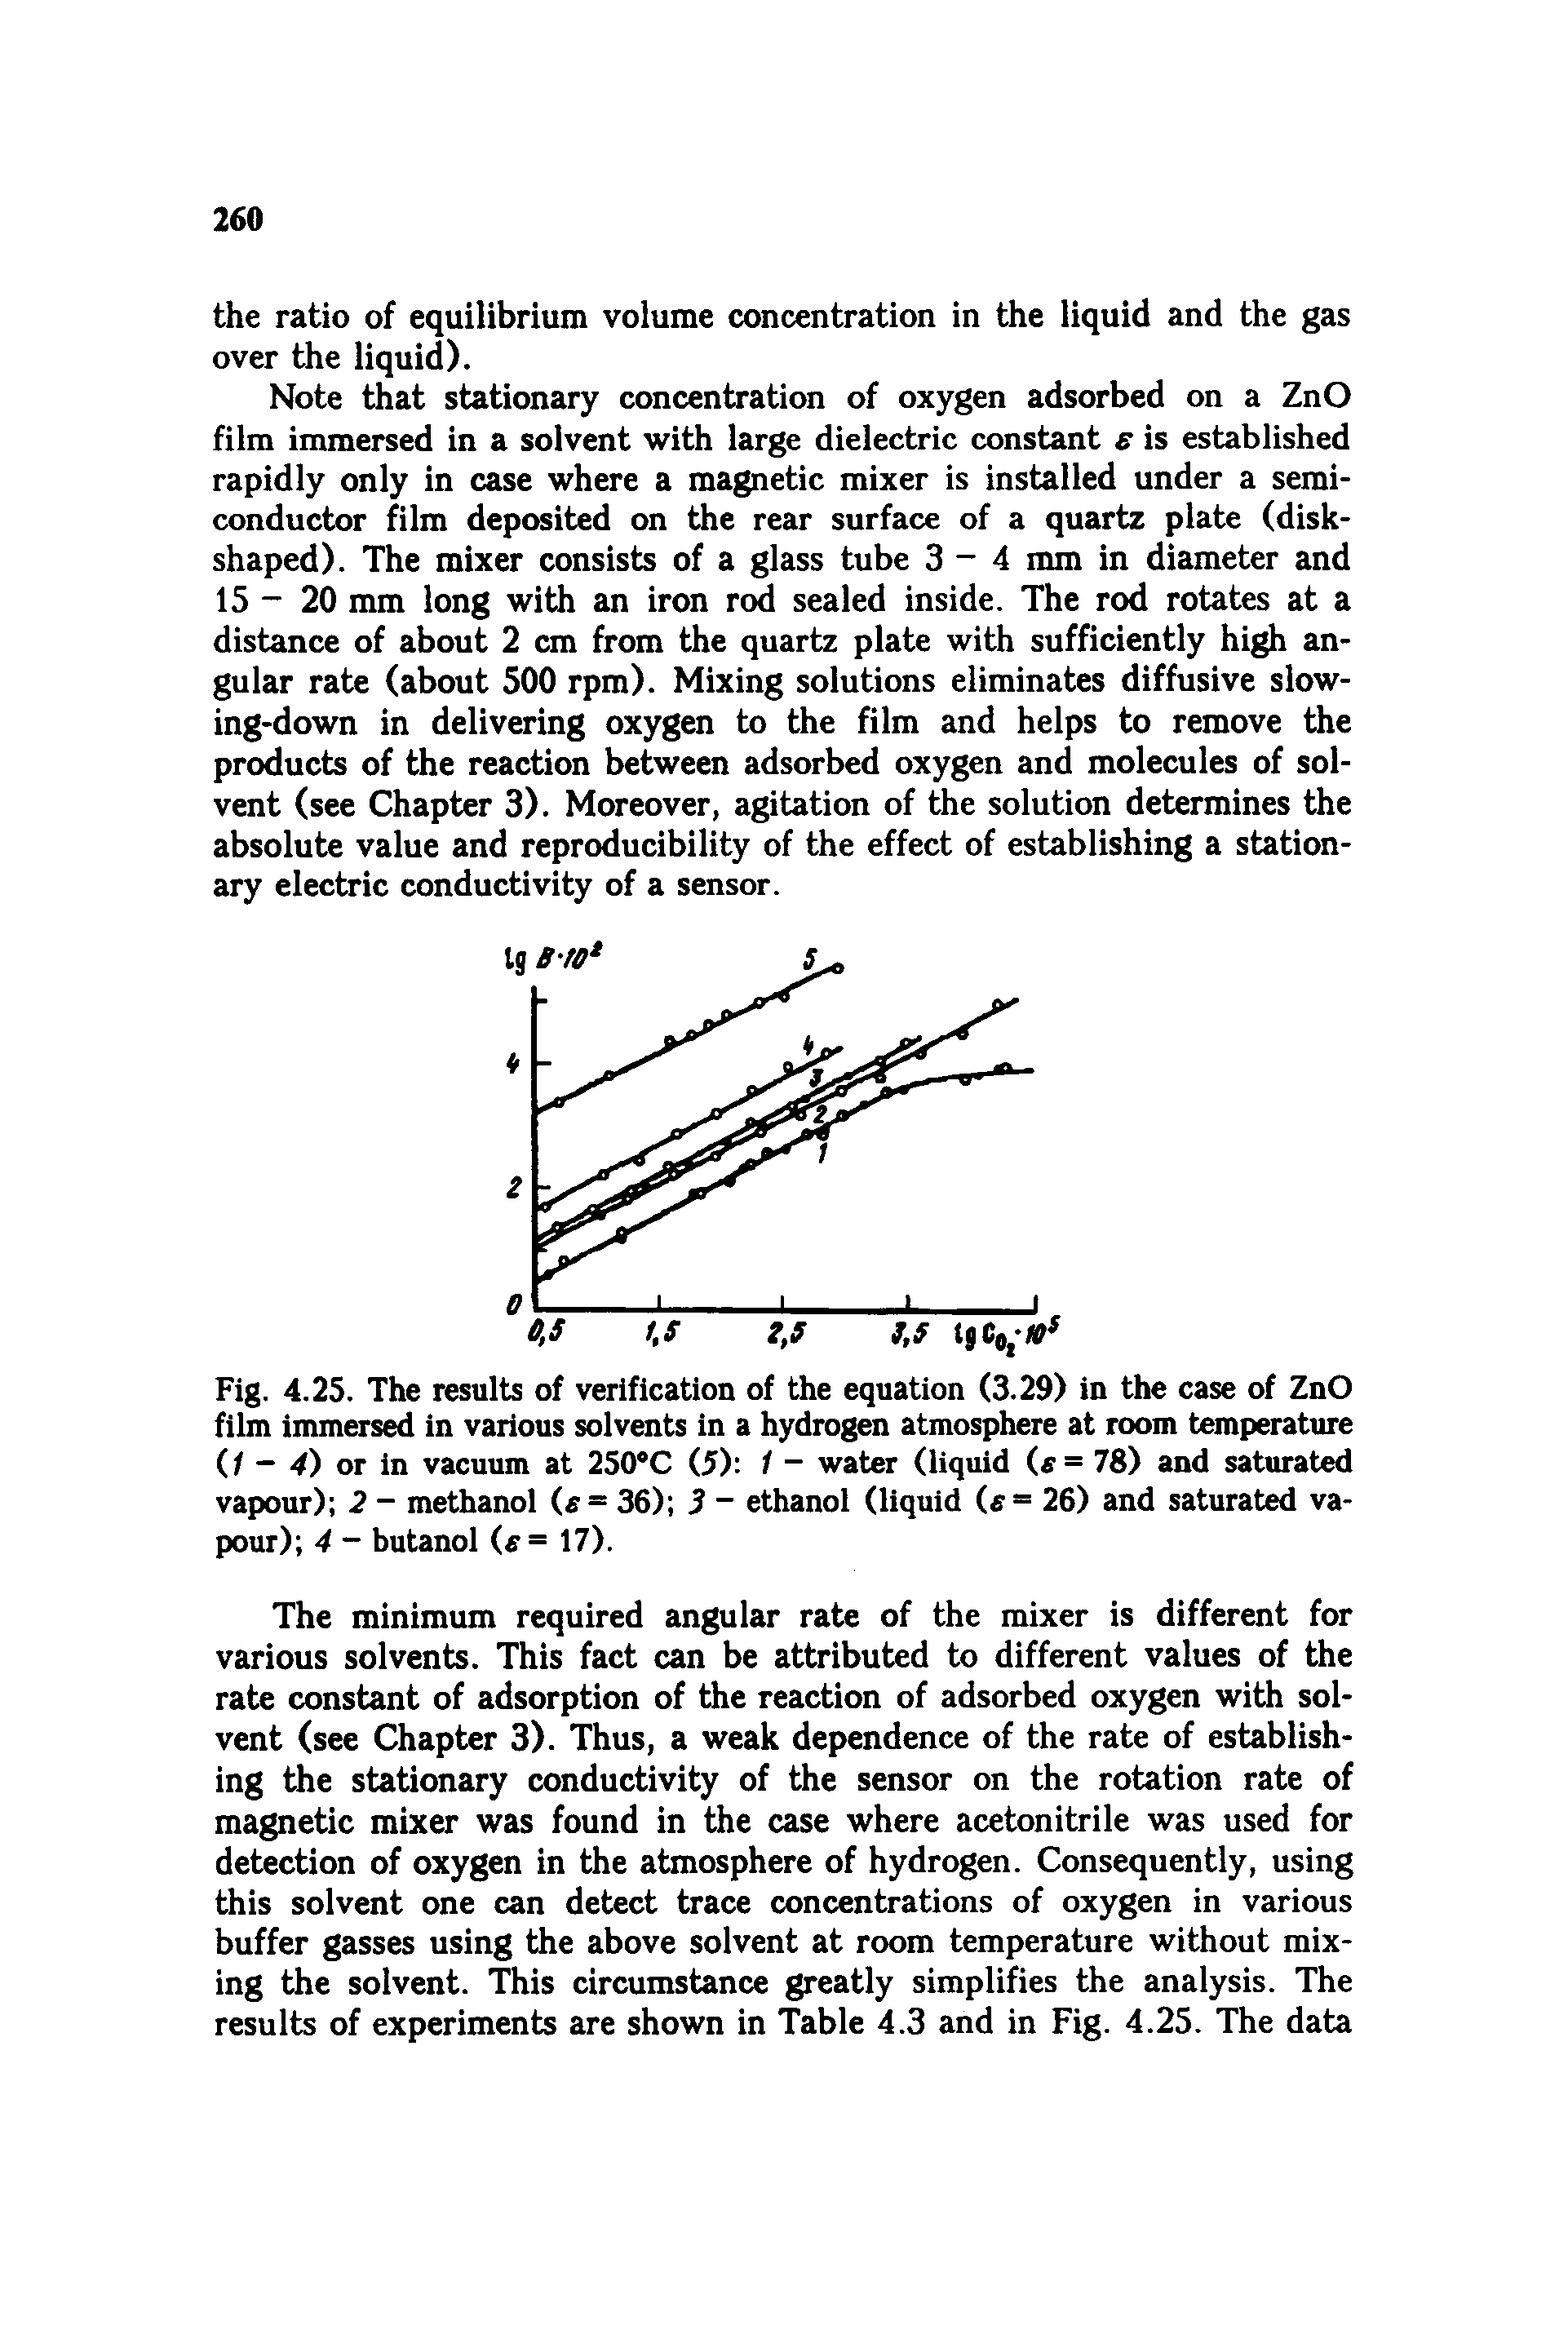 Fig. 4.25. The results of verification of the equation (3.29) in the case of ZnO film immersed in various solvents in a hydrogen atmosphere at room temperature ( / - 4) or in vacuum at 250 C (5) 1 water (liquid is= 78) and saturated vapour) 2 - methanol ( = 36) 3 ethanol (liquid ie= 26) and saturated vapour) 4 - butanol (f = 17).